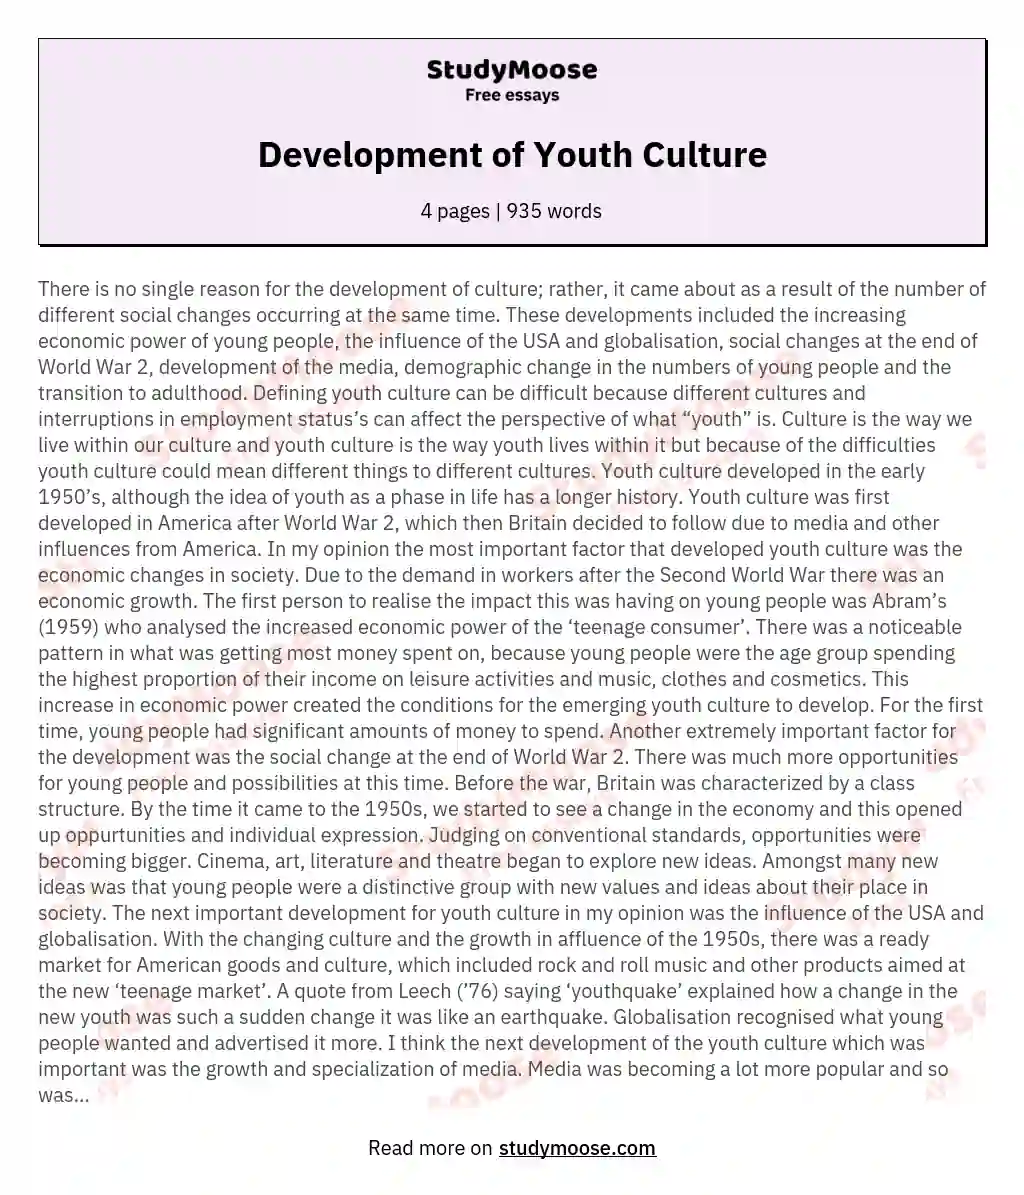 Development of Youth Culture essay